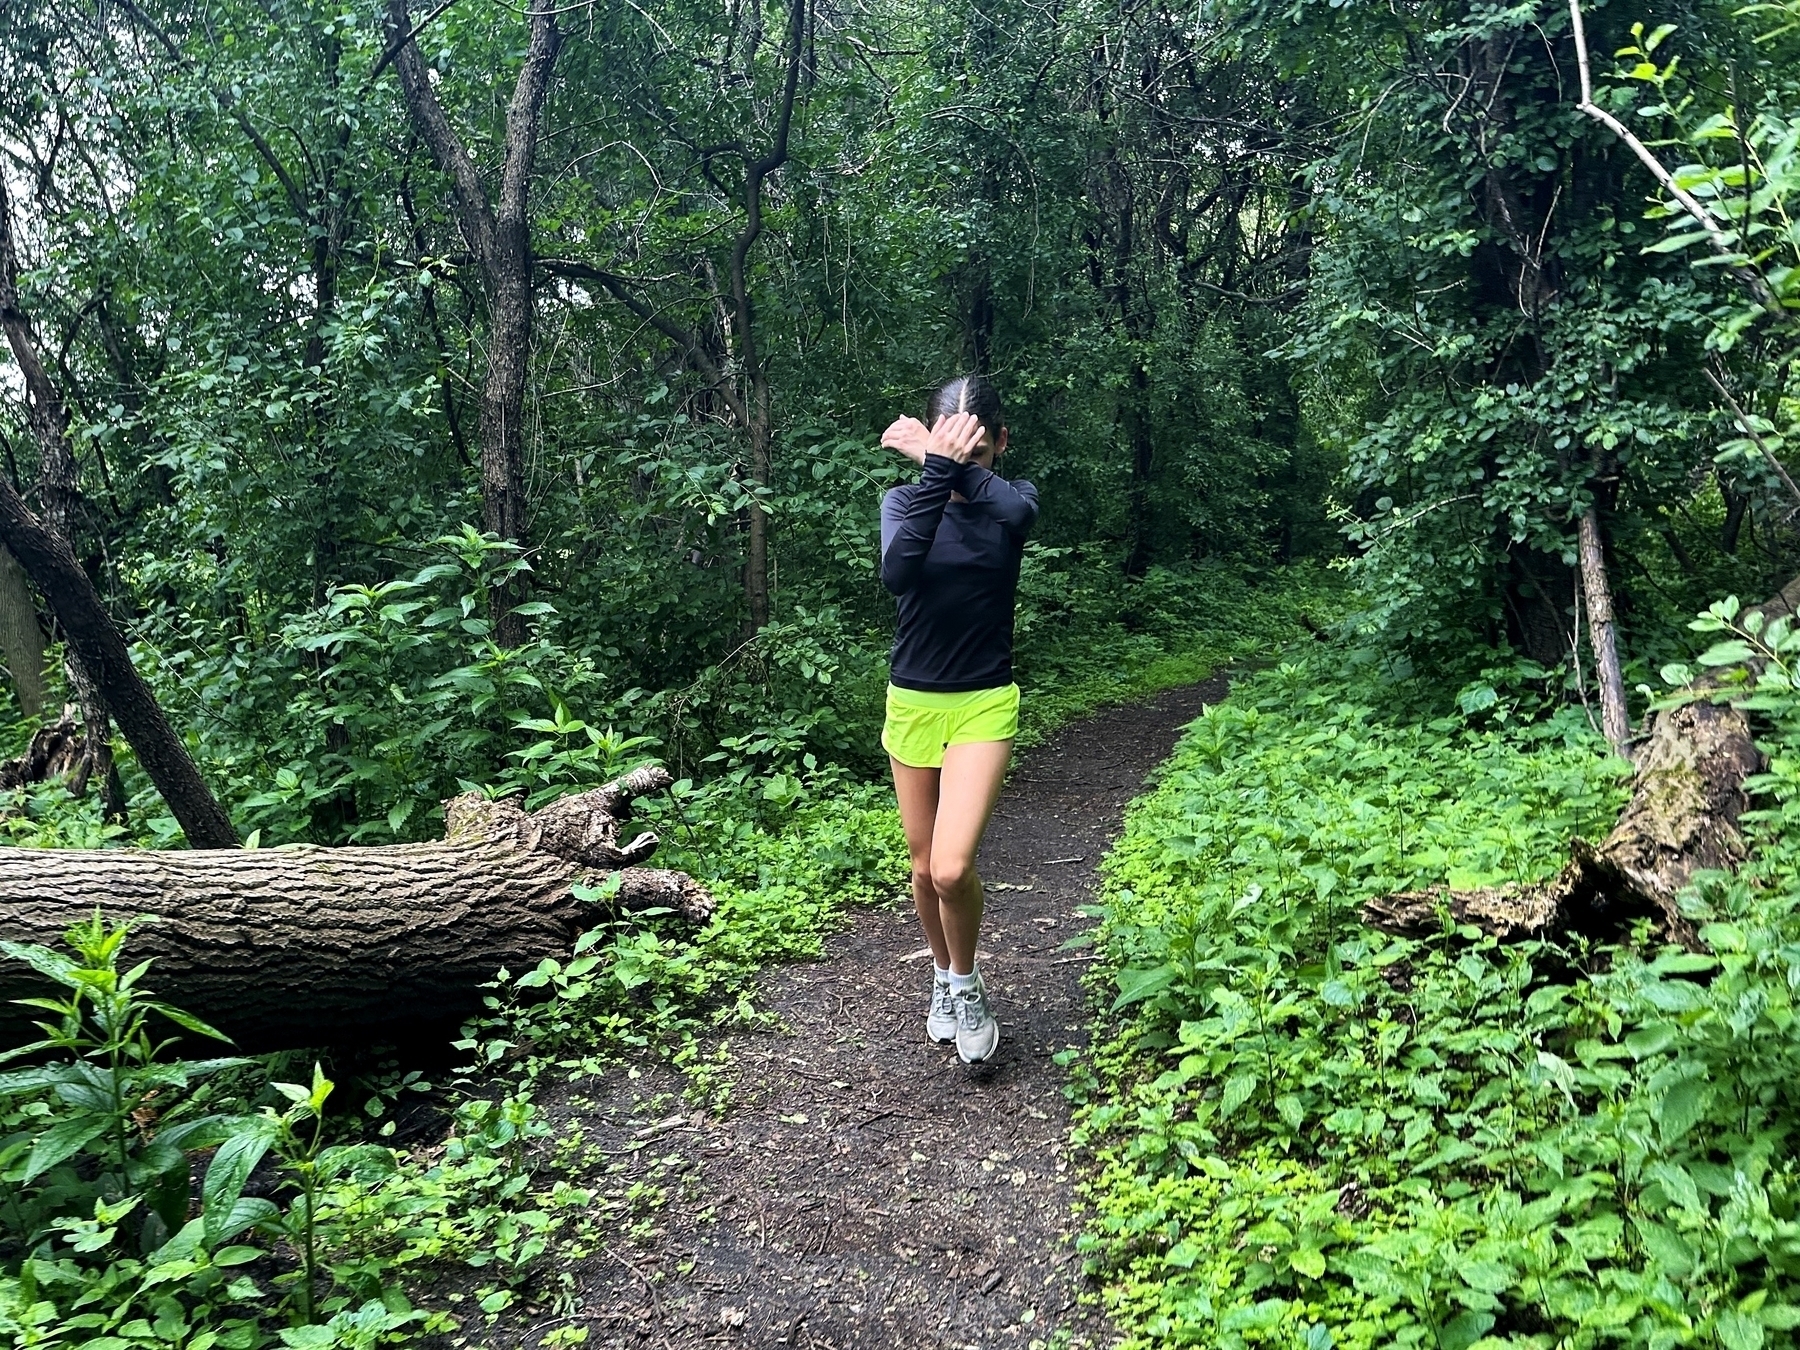 Person running through a dense forest with leafy, green plants and trees; the person is wearing a black top and neon yellow shorts and is covering their face with their hands.